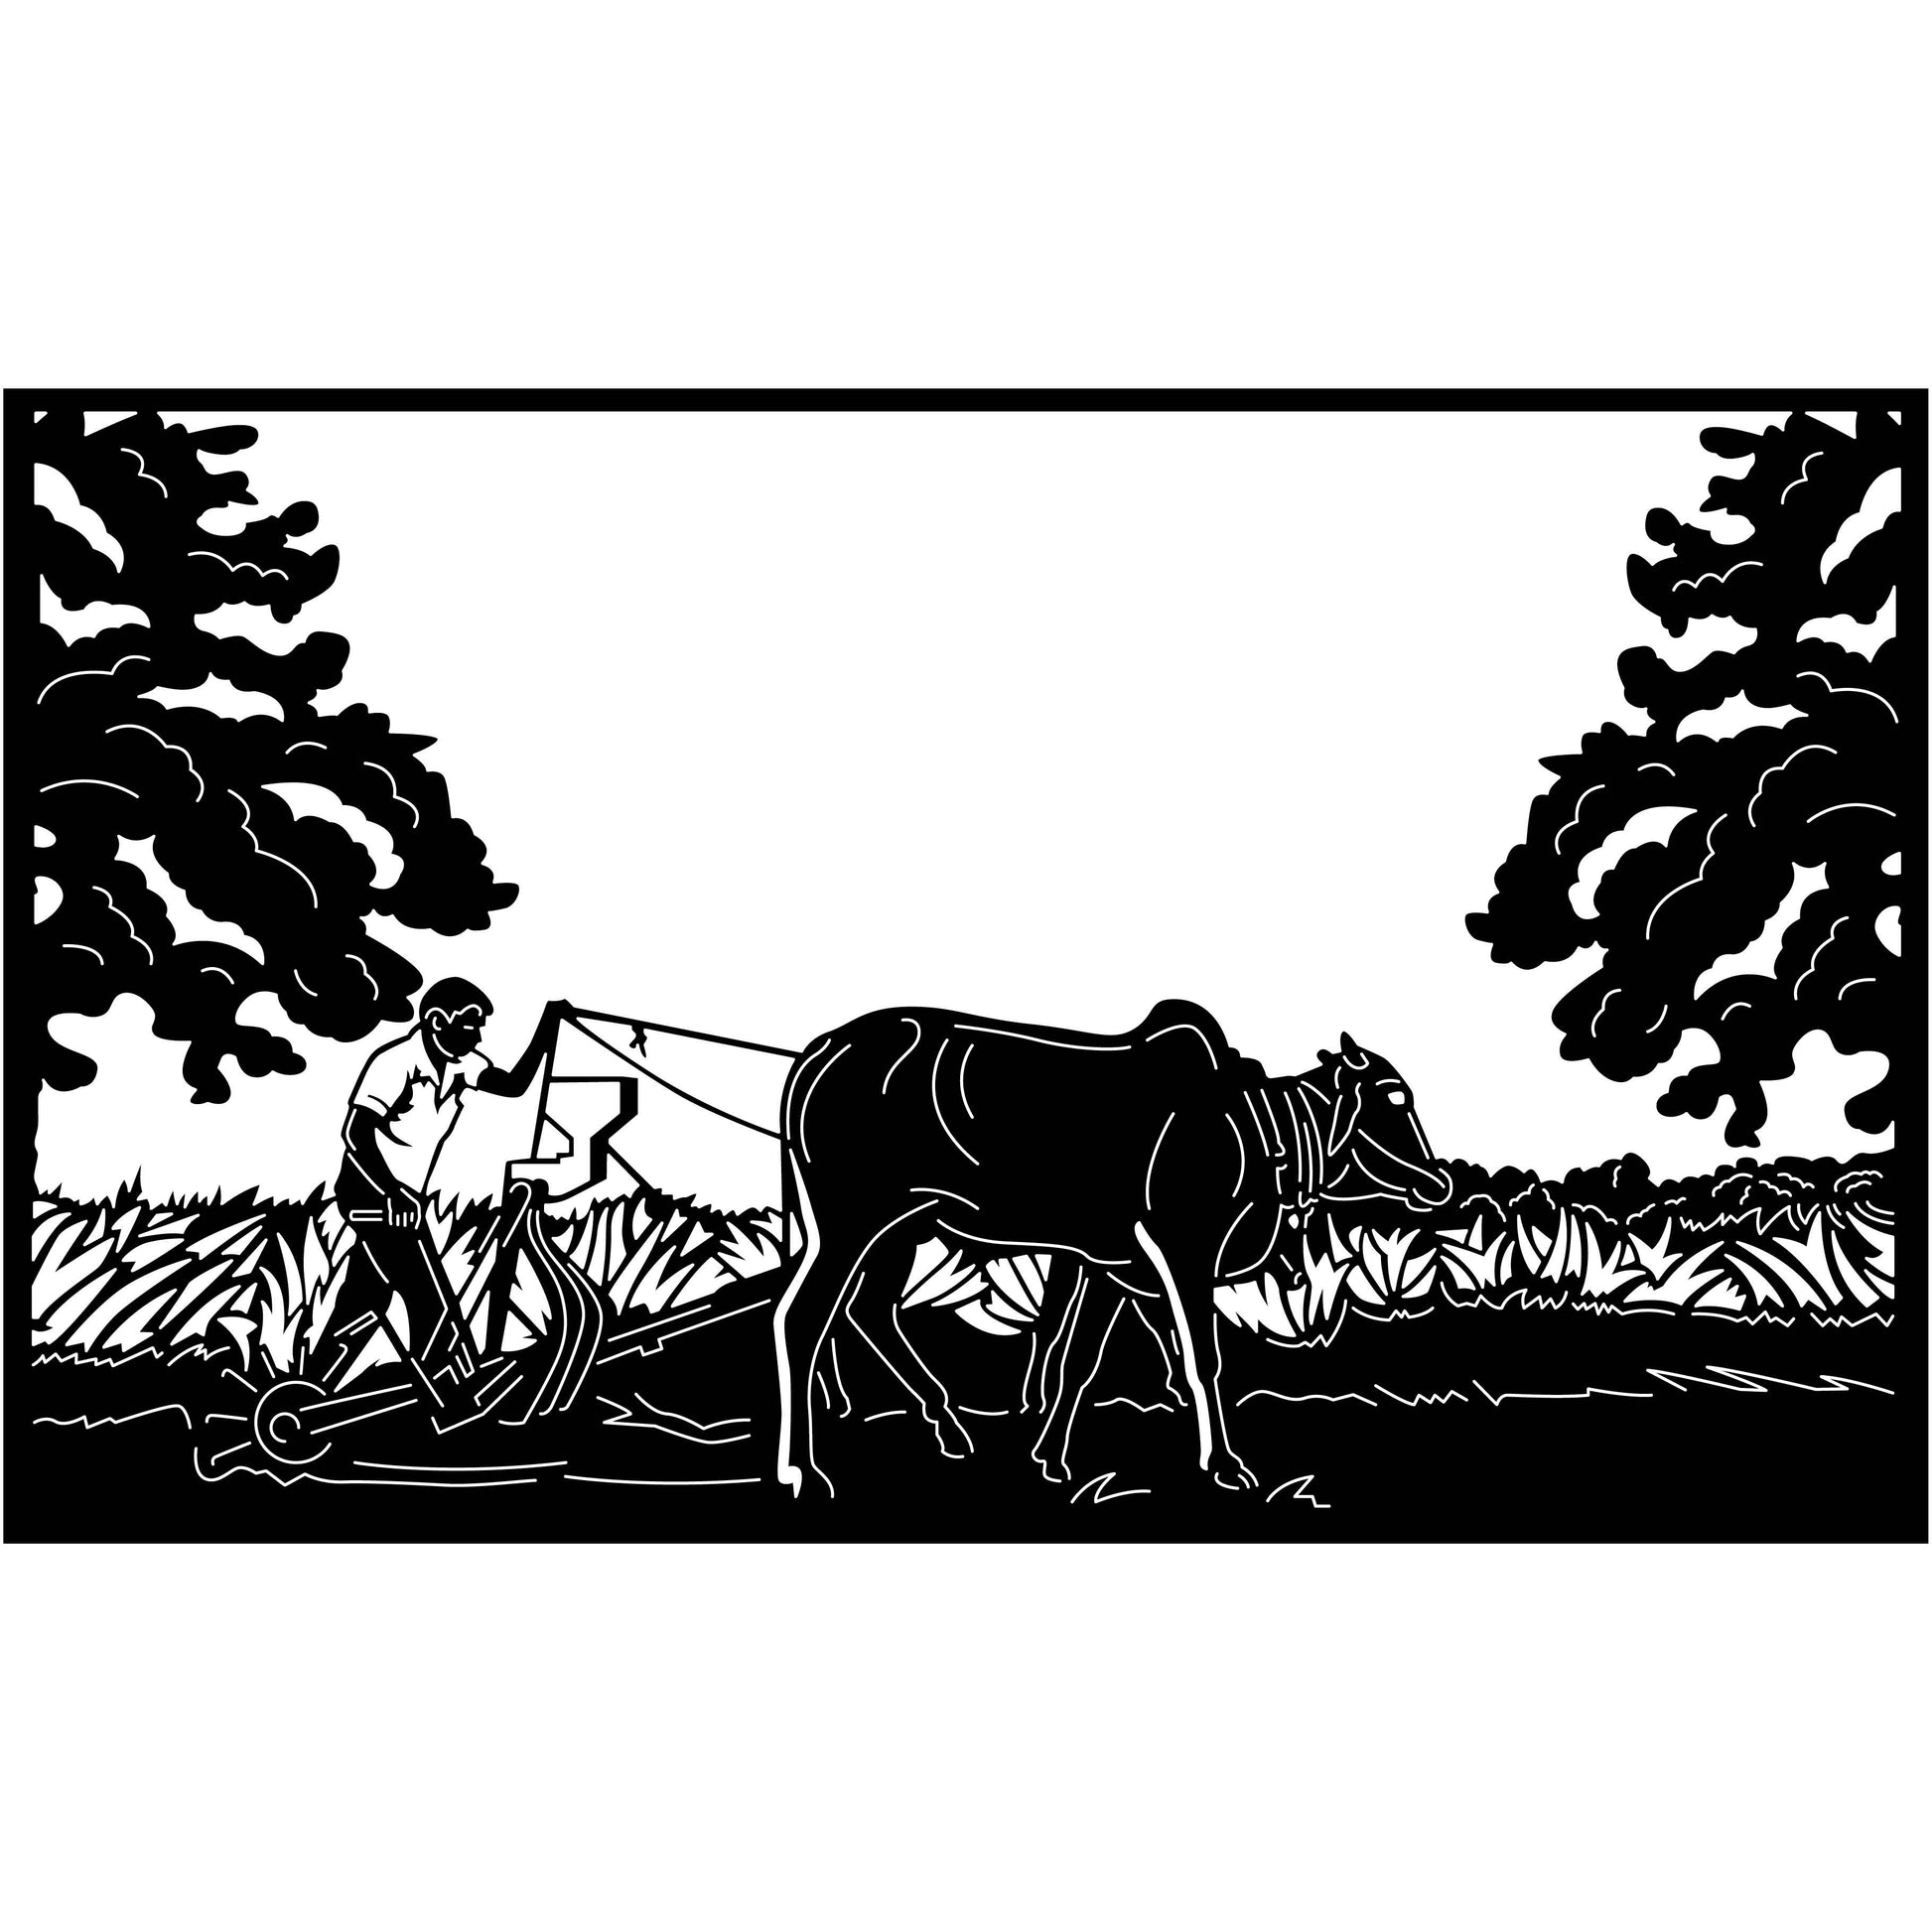 Farmer Plow Farms with Cows Scene-DXF files Cut Ready for CNC-DXFforCNC.com